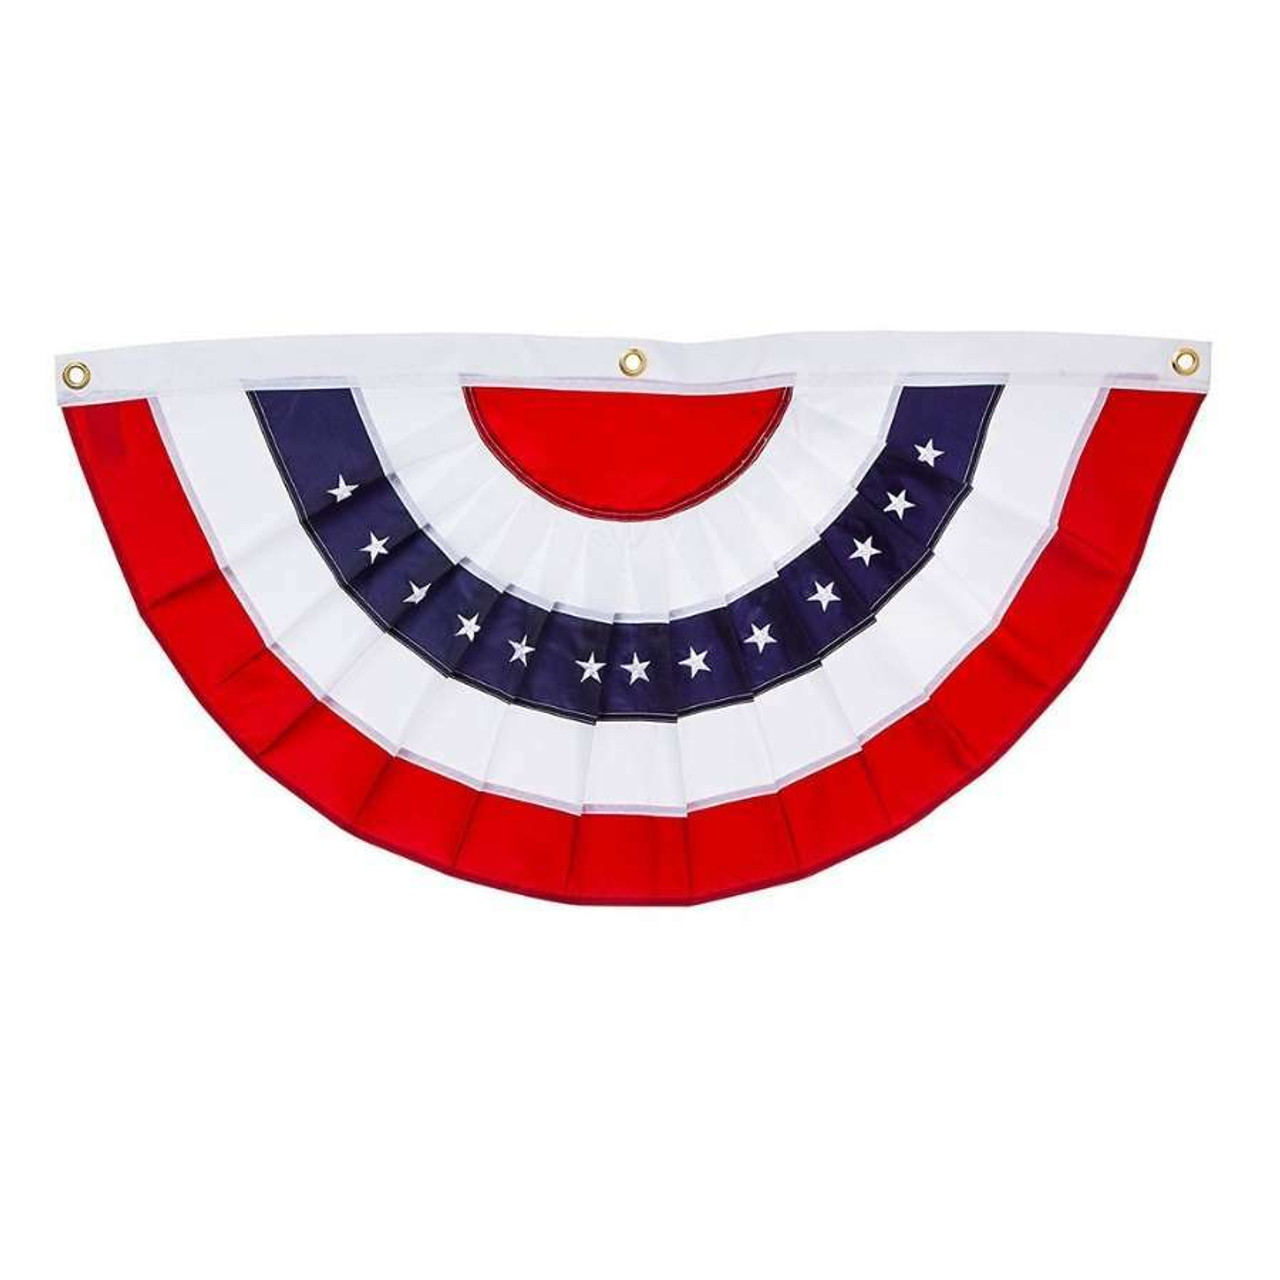 American flag-inspired pleated fan that features red, white, and blue stripes and white stars.